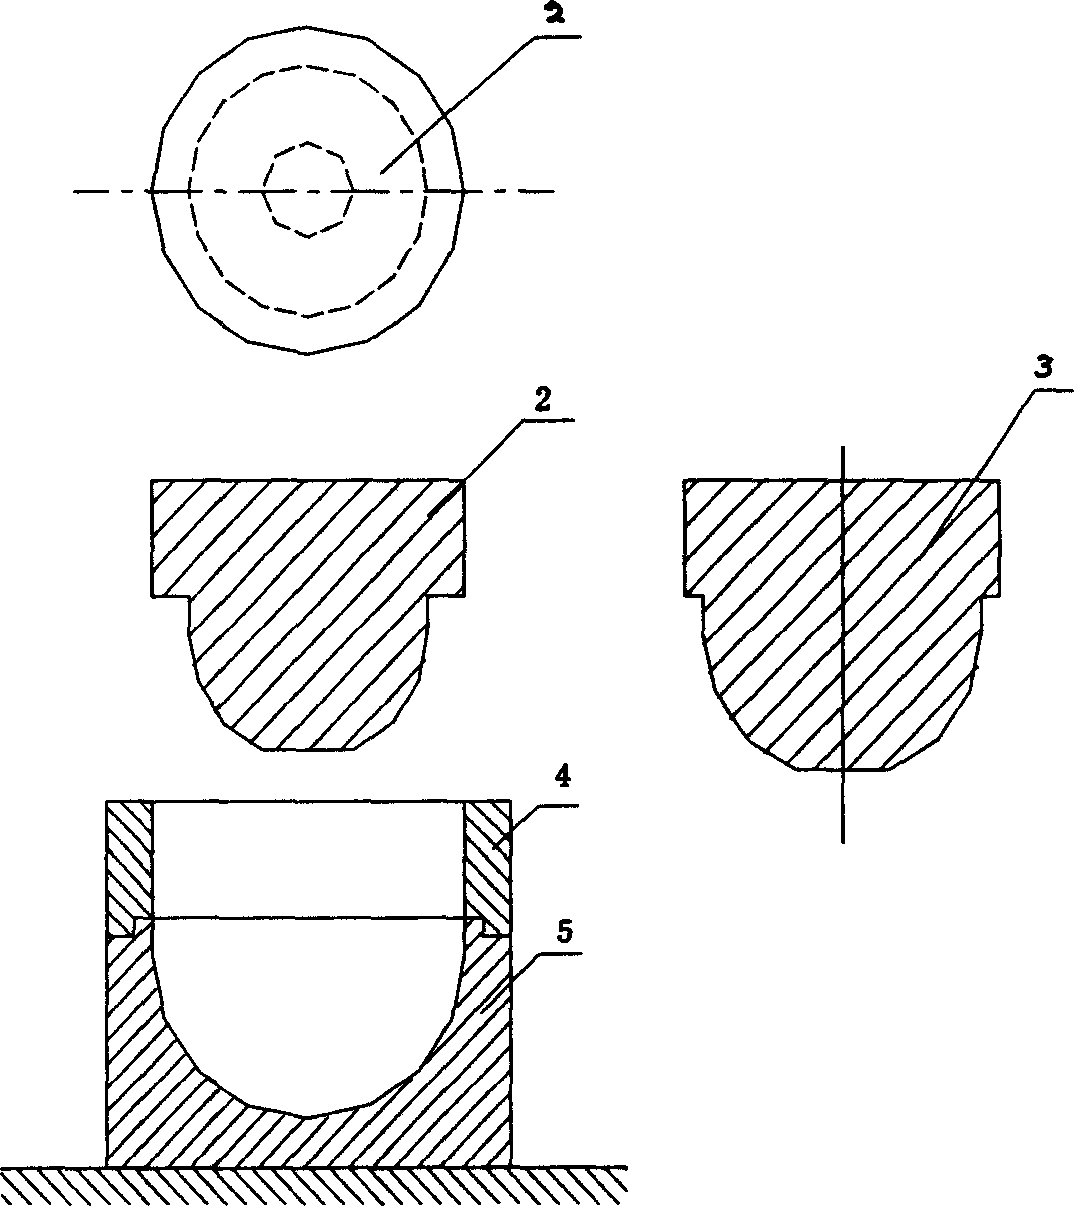 Die pressing and forming method for polytetrafluoroethylene thin wall crustose products flexible die